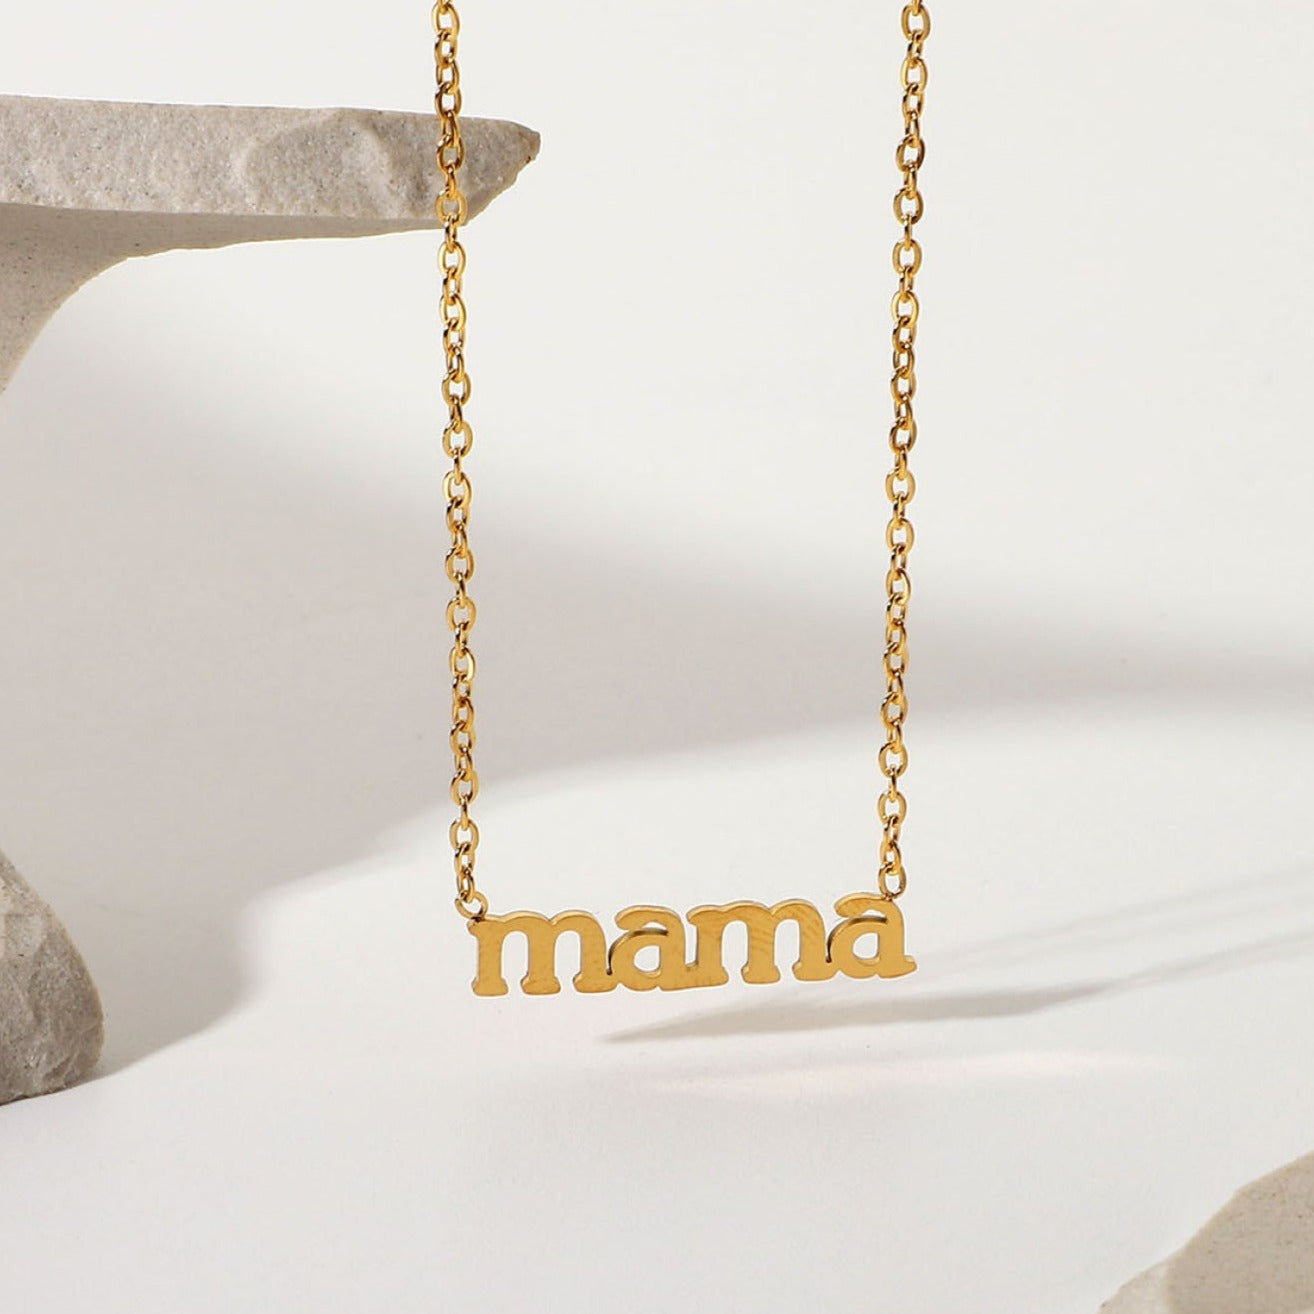 1# BEST Gold Mama Pendant Necklace Jewelry Gift for Women | #1 Best Most Top Trendy Trending Aesthetic Yellow Gold Mama Letter Pendant Necklace Jewelry Gift for Women, Girls, Girlfriend, Mother, Wife, Daughter, Ladies | Mason & Madison Co.